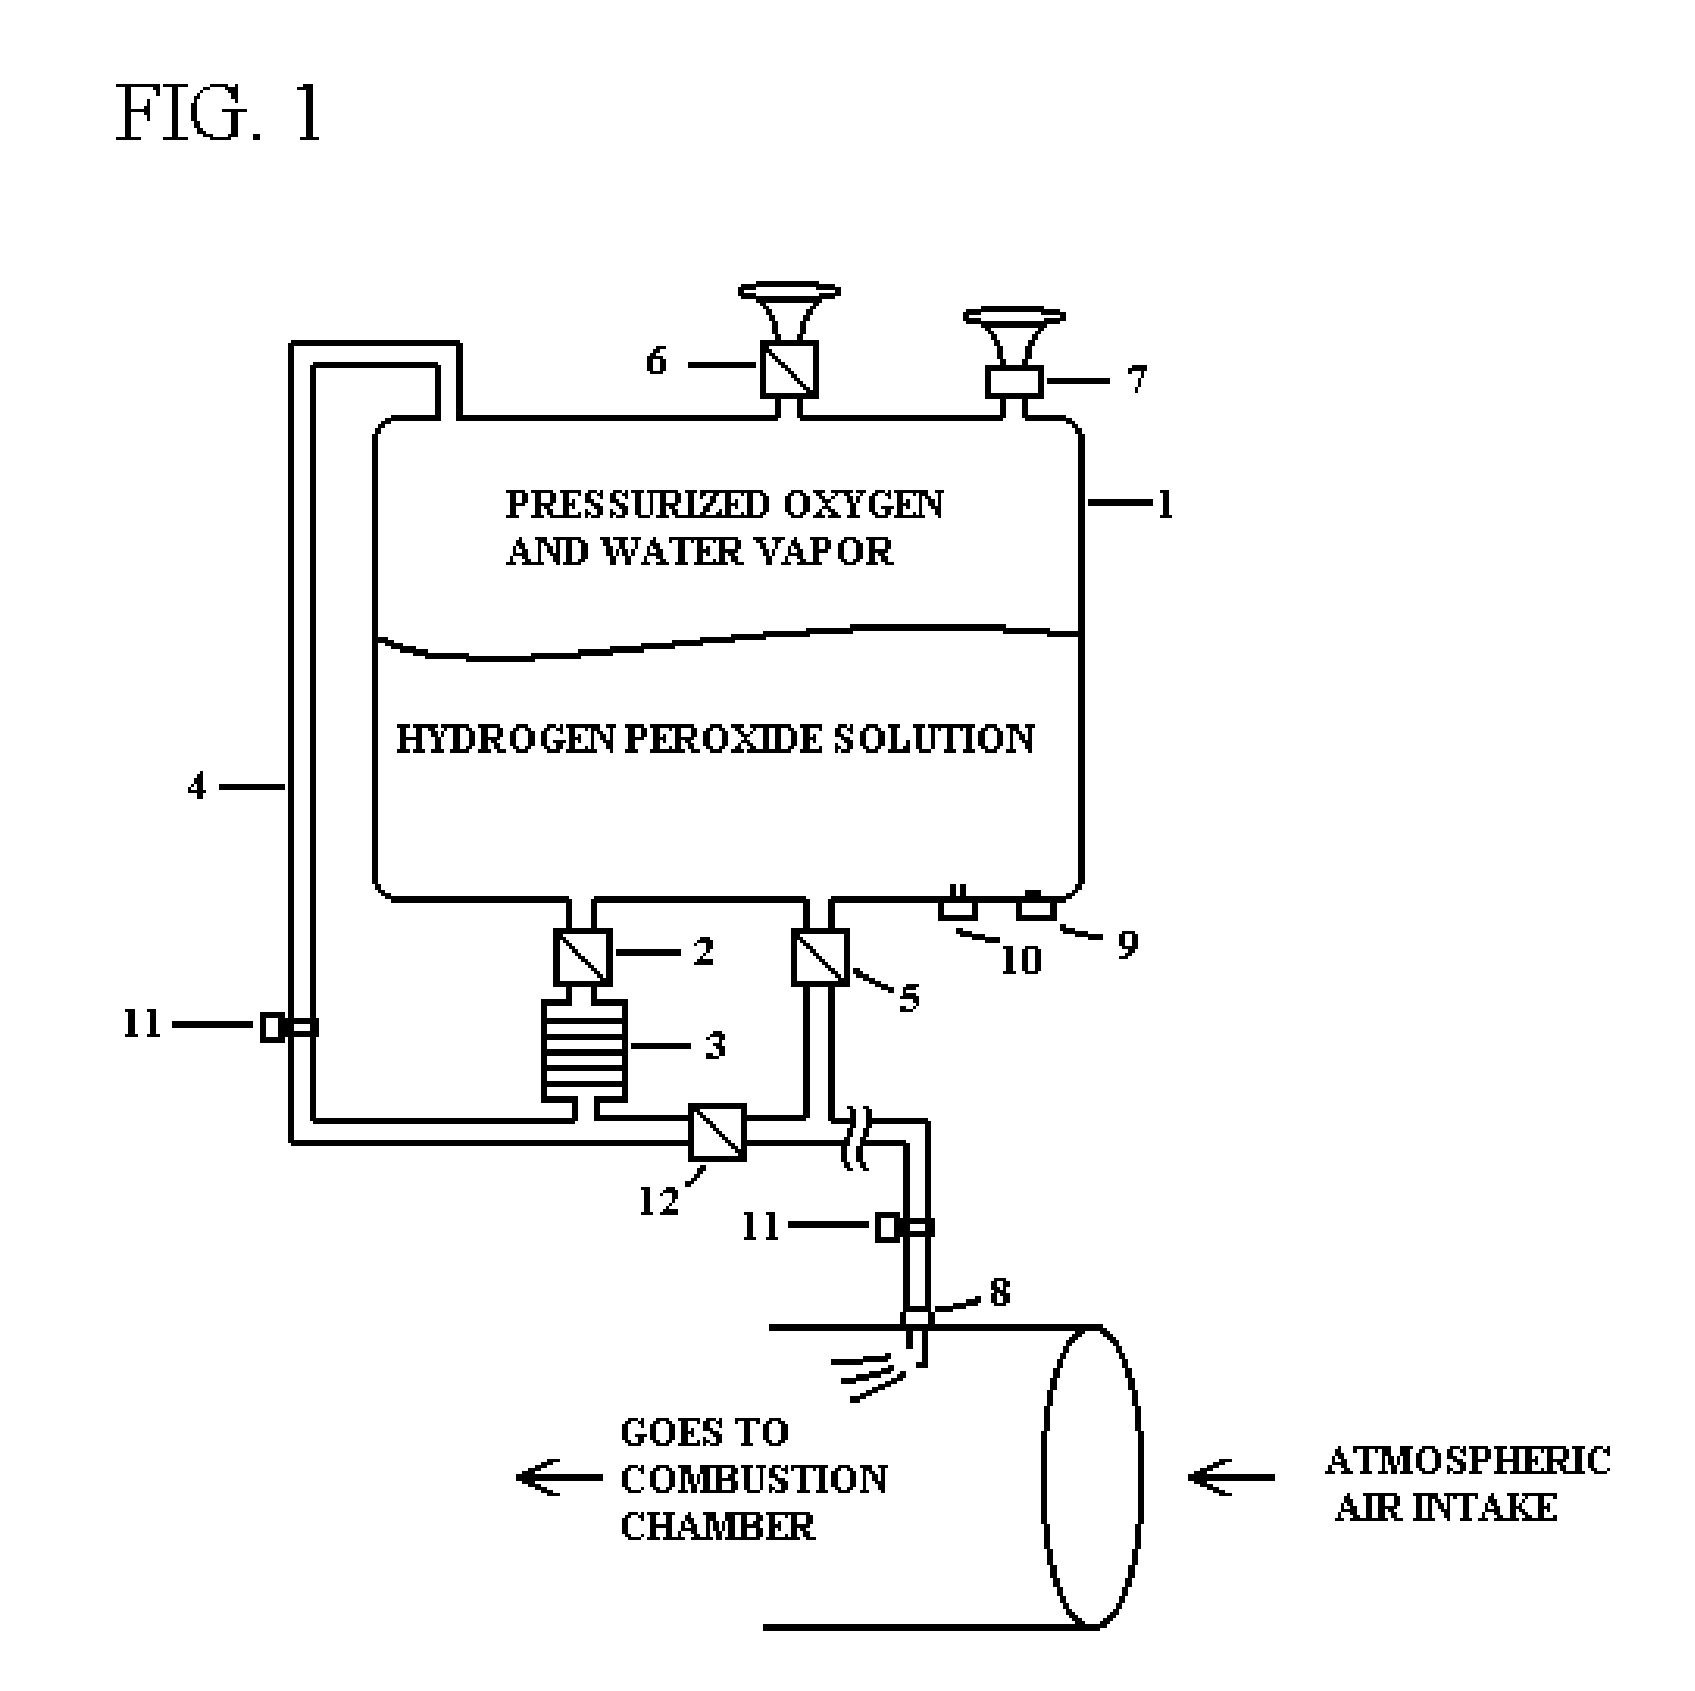 Hydrogen peroxide injection engine and combustion fuel supplamentation